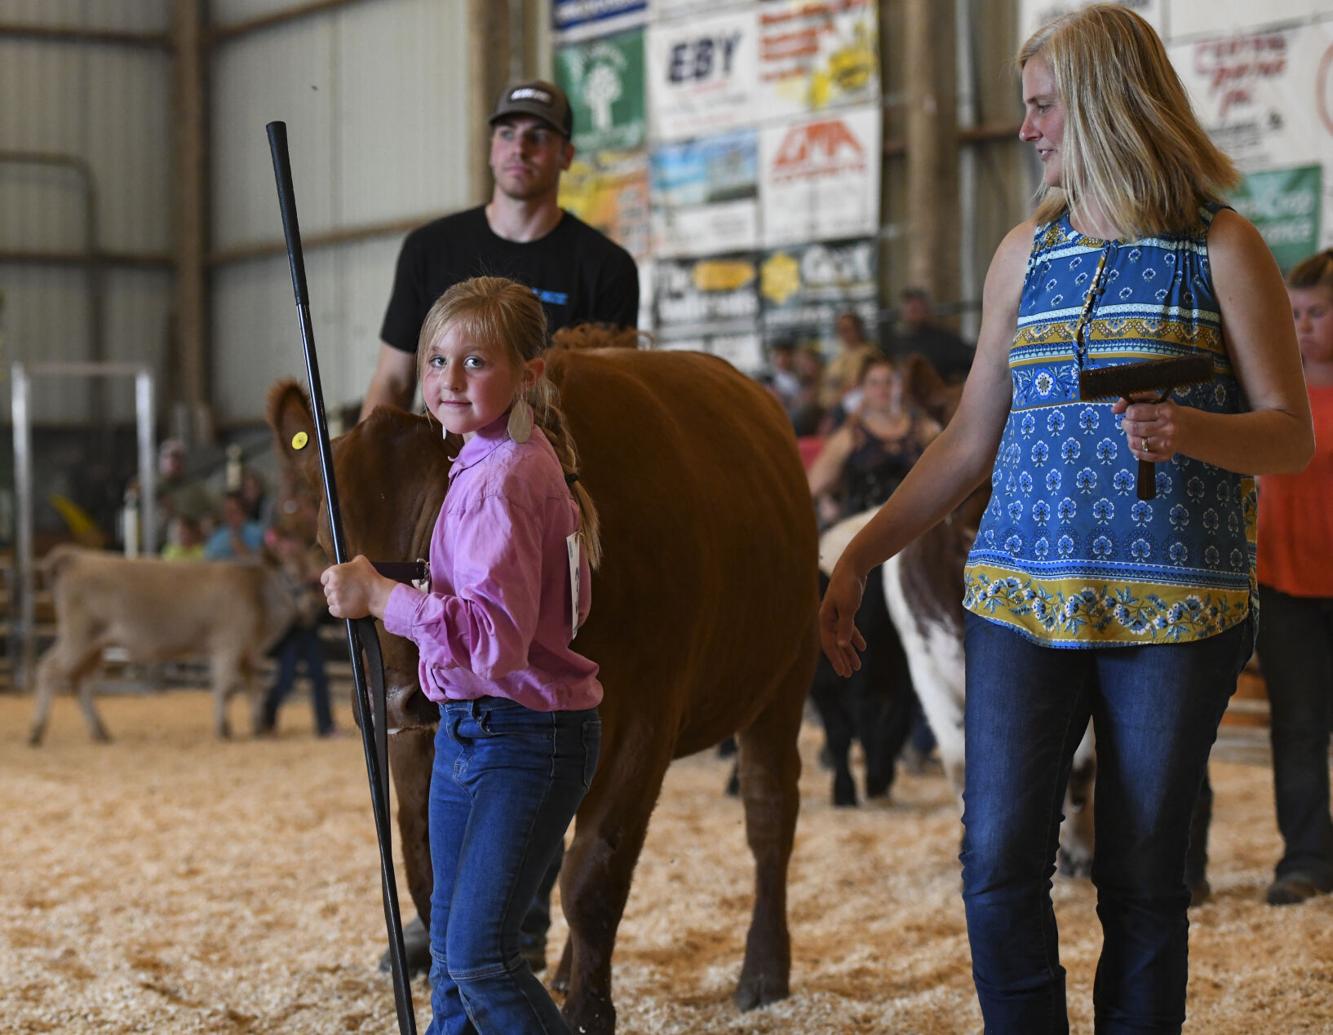 2021 Cass County 4H Fair Schedule, event guide and more News